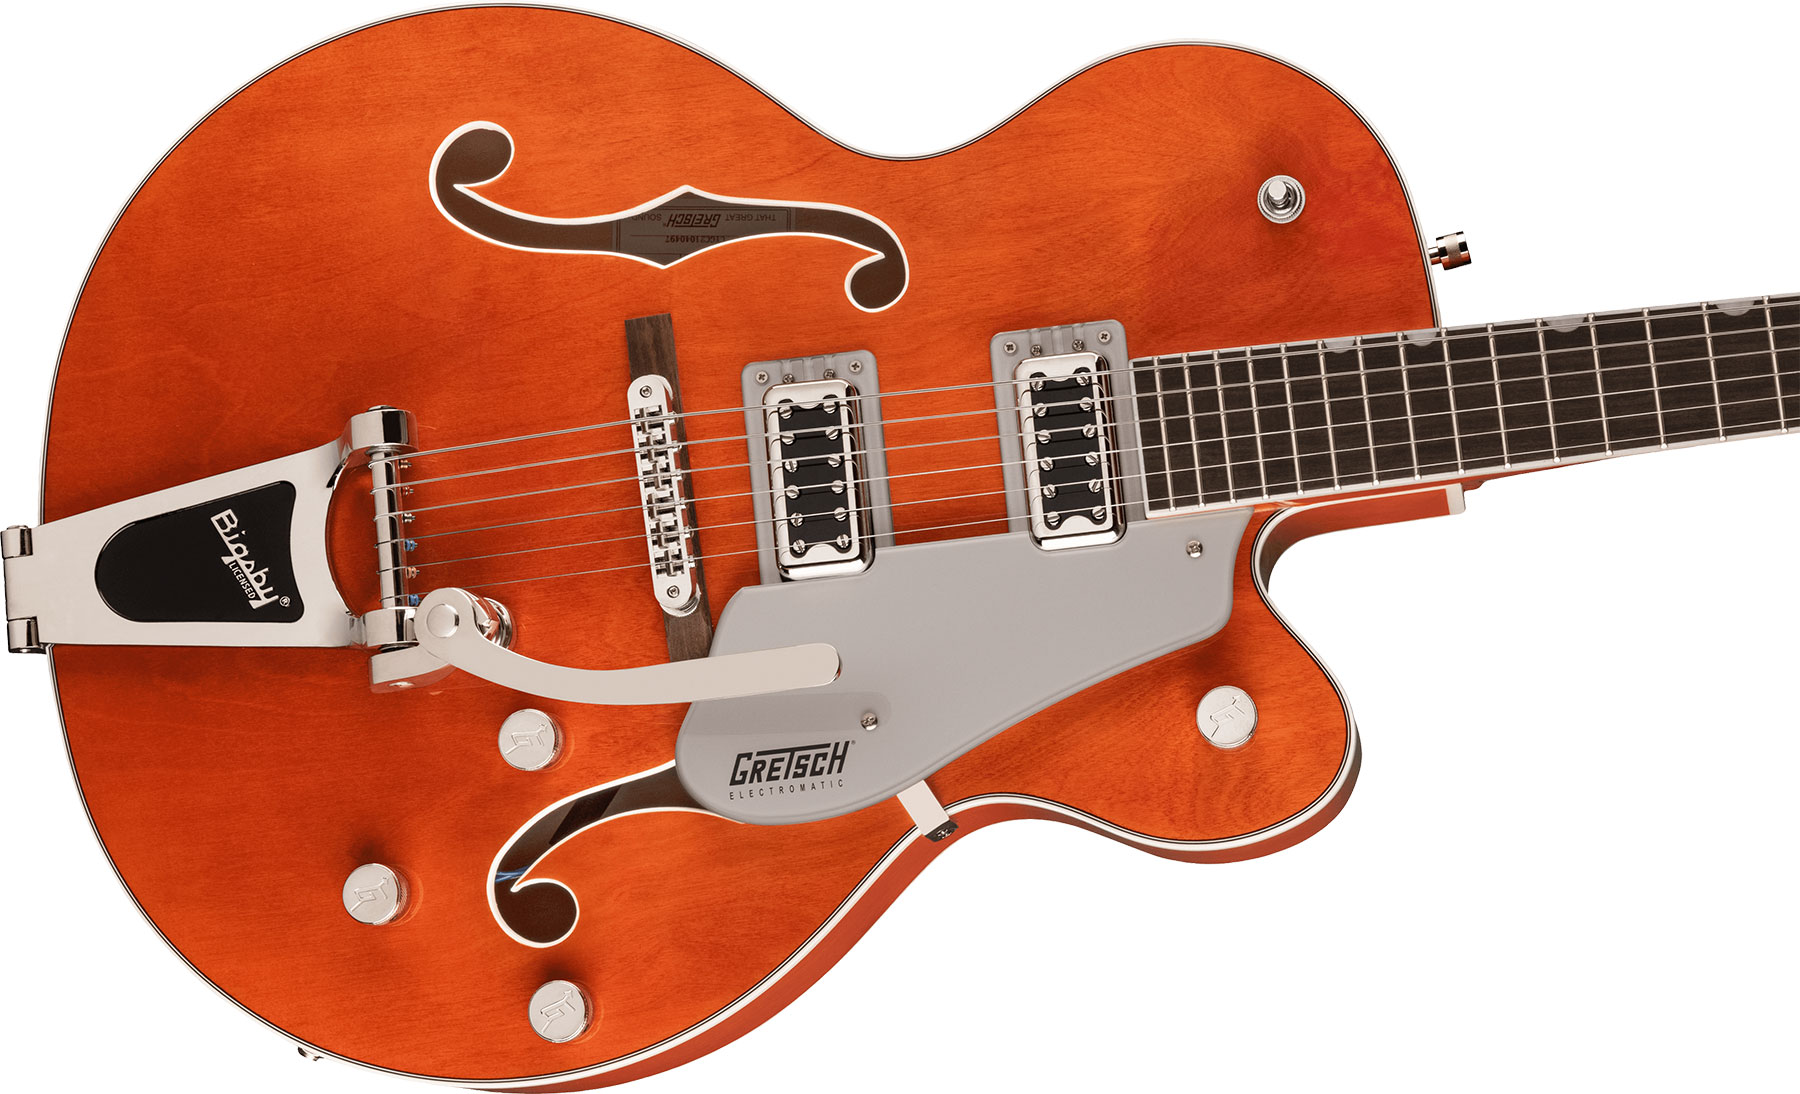 Gretsch G5420t Classic Electromatic Hollow Body Hh Trem Bigsby Lau - Orange Stain - Semi-hollow electric guitar - Variation 2